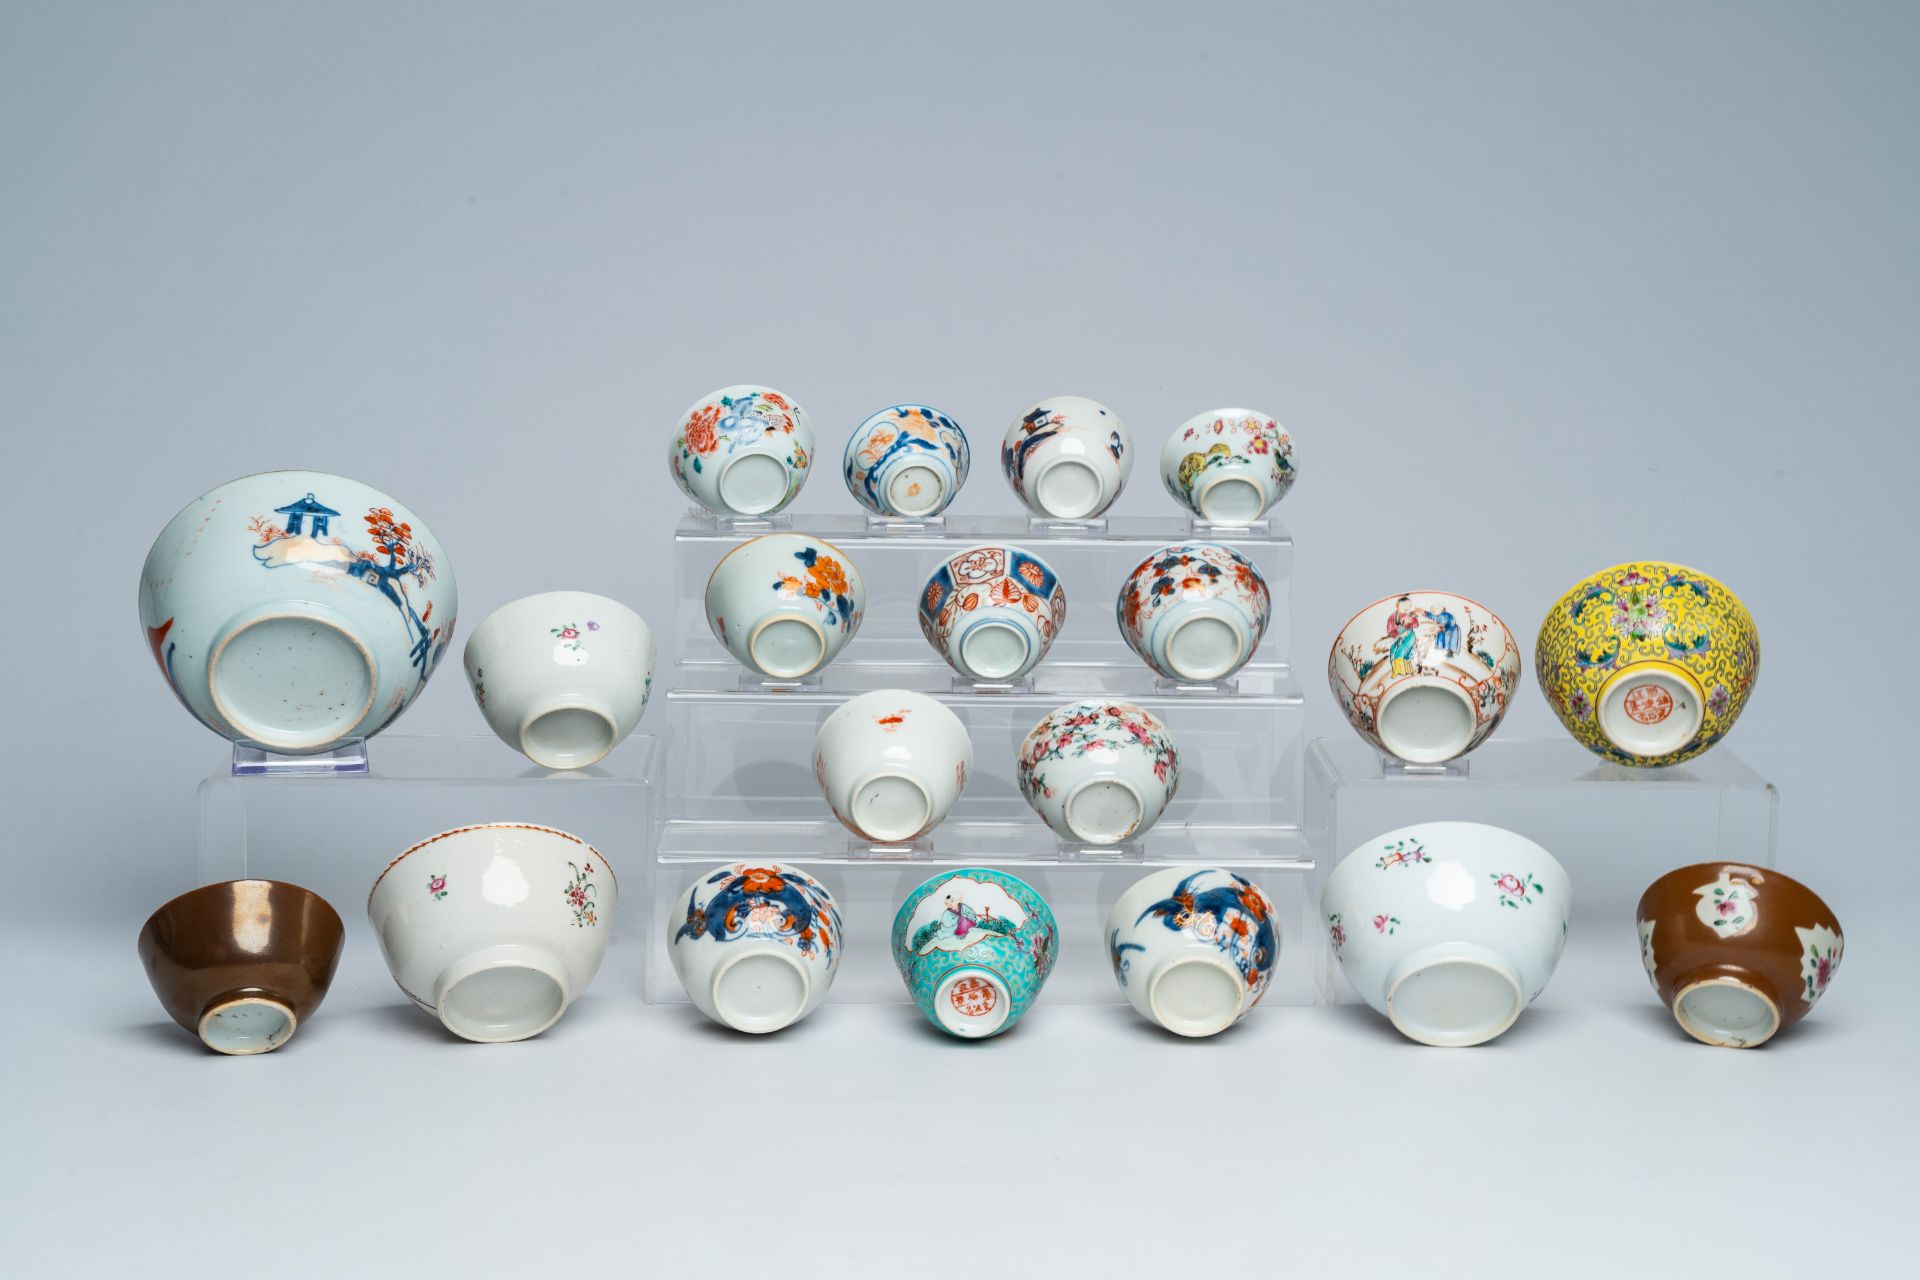 A varied collection of Chinese cups and saucers with various designs, 18th C. and later - Image 7 of 11